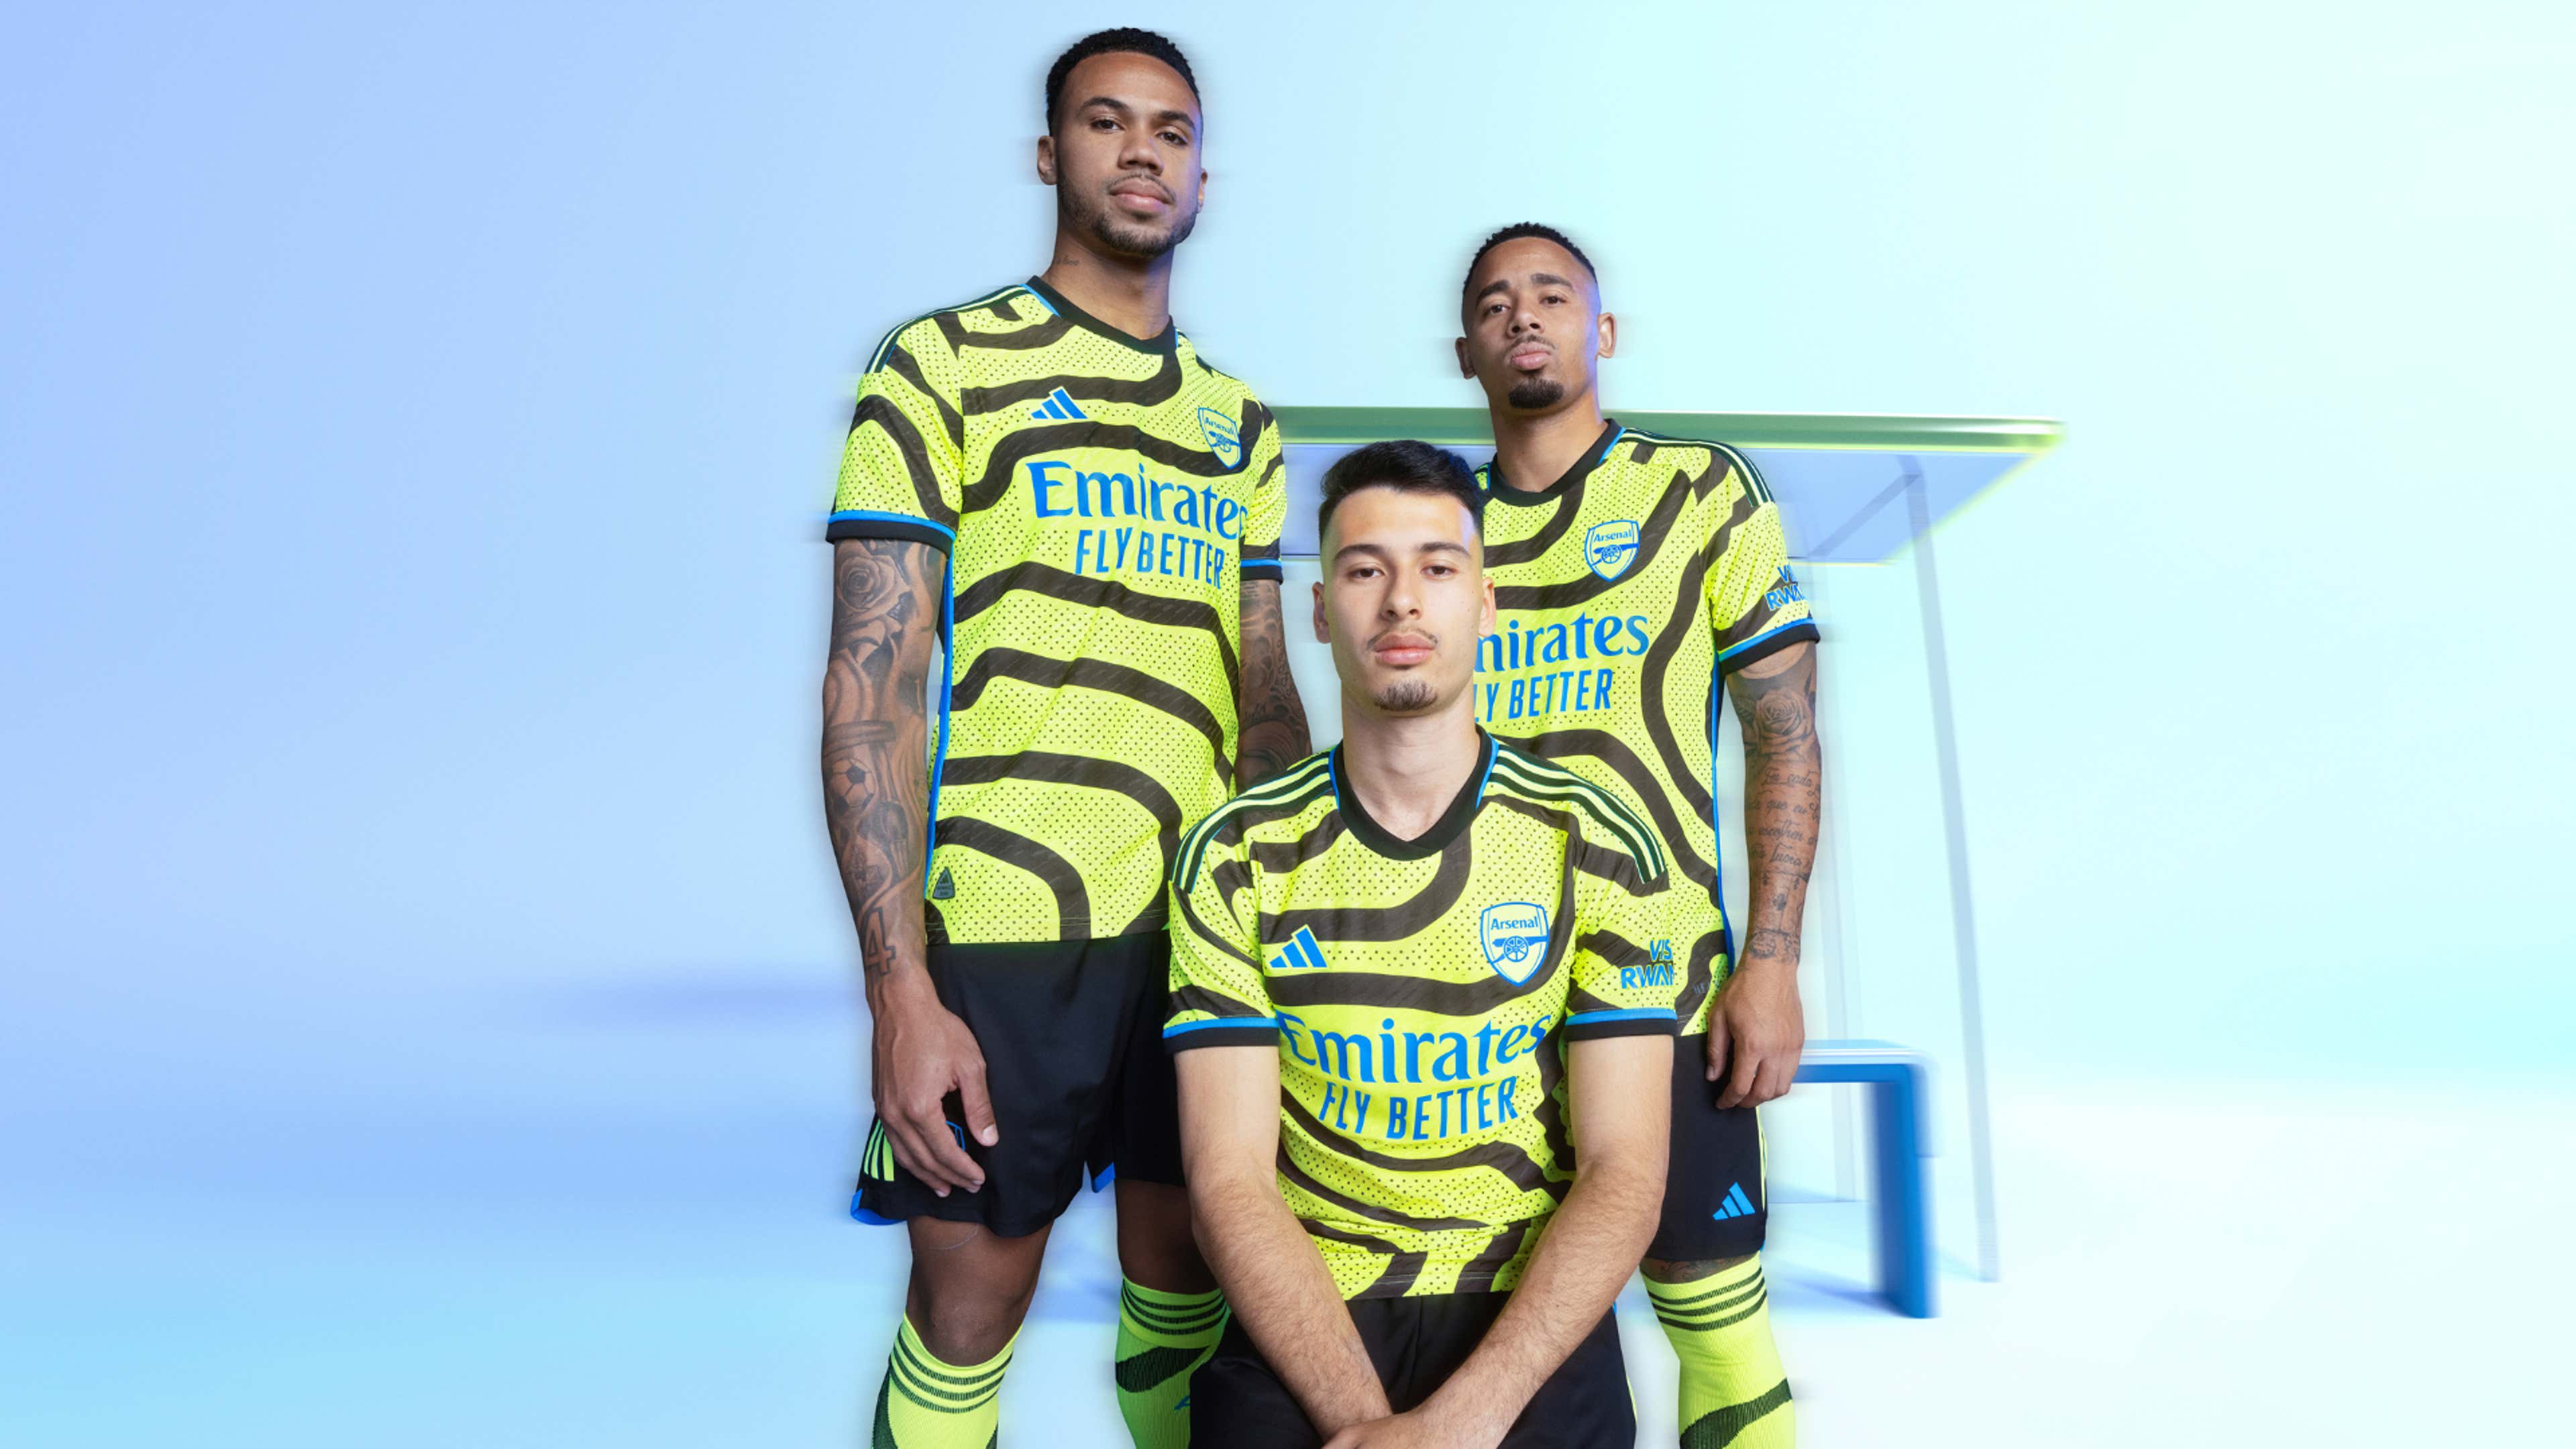 adidas unveils Arsenal 2023-24 away kit inspired by the club's